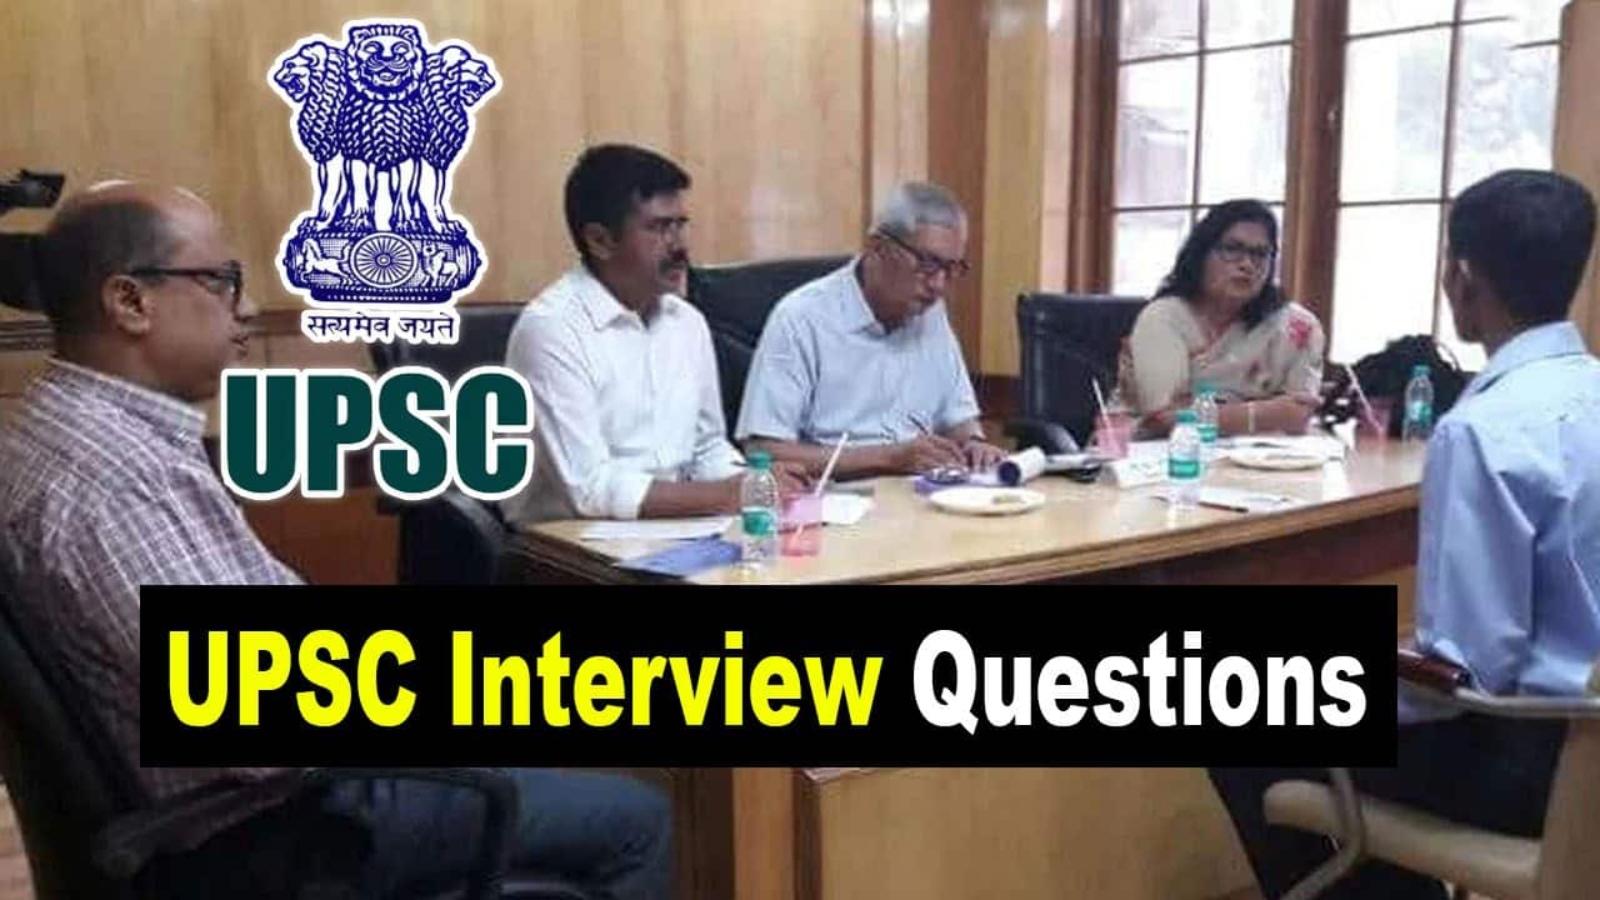 UPSC IAS interview questions in hindi | UPSC Interview || IAS IPS Interview  Questions | | Interview questions, Questions? image, Interview